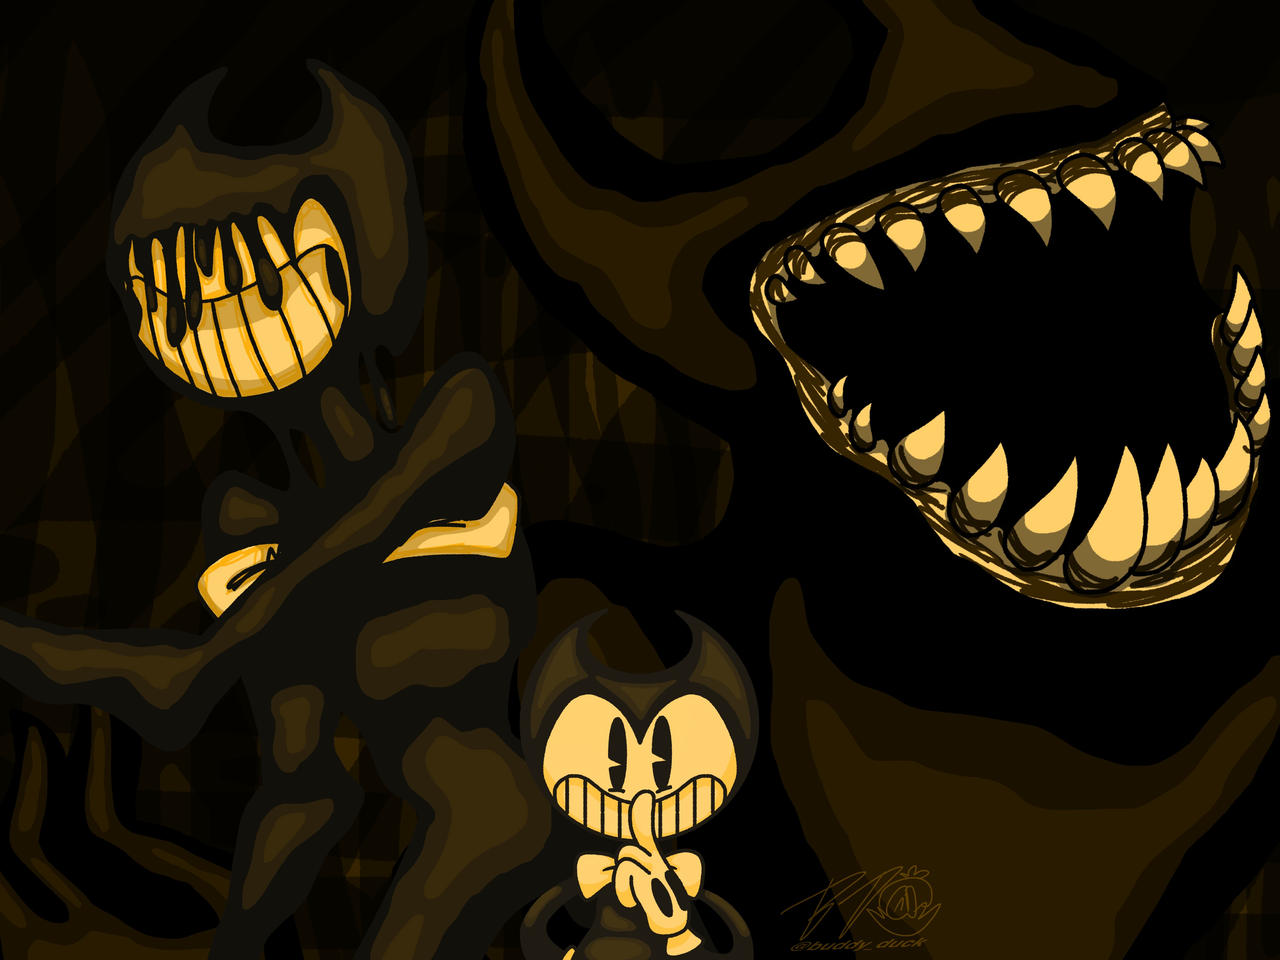 Bendy and the Ink Machine 2 by SoulKiller202 on DeviantArt